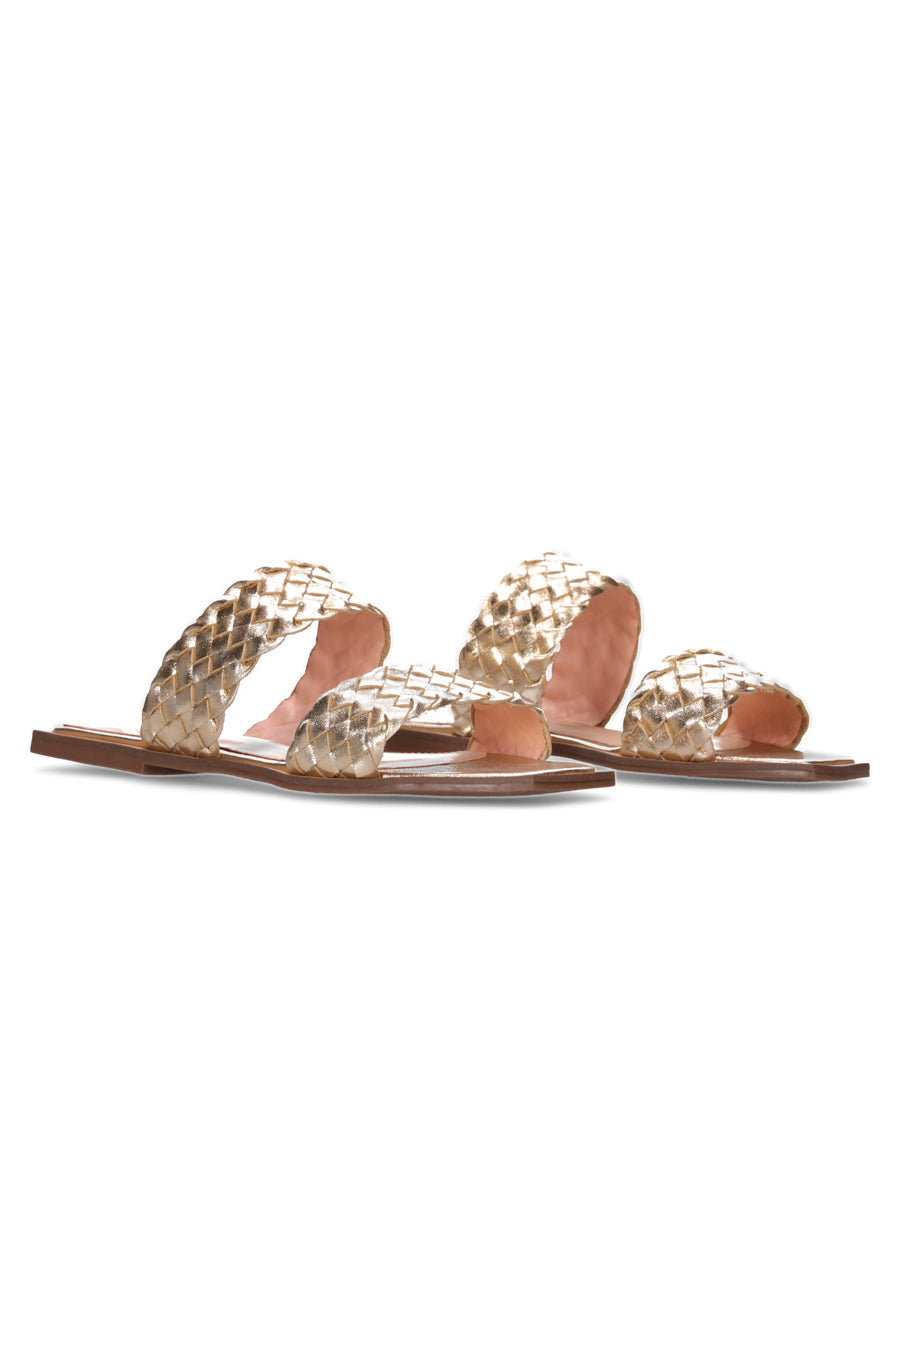 Hey Monday Lucy Sandal- Gold